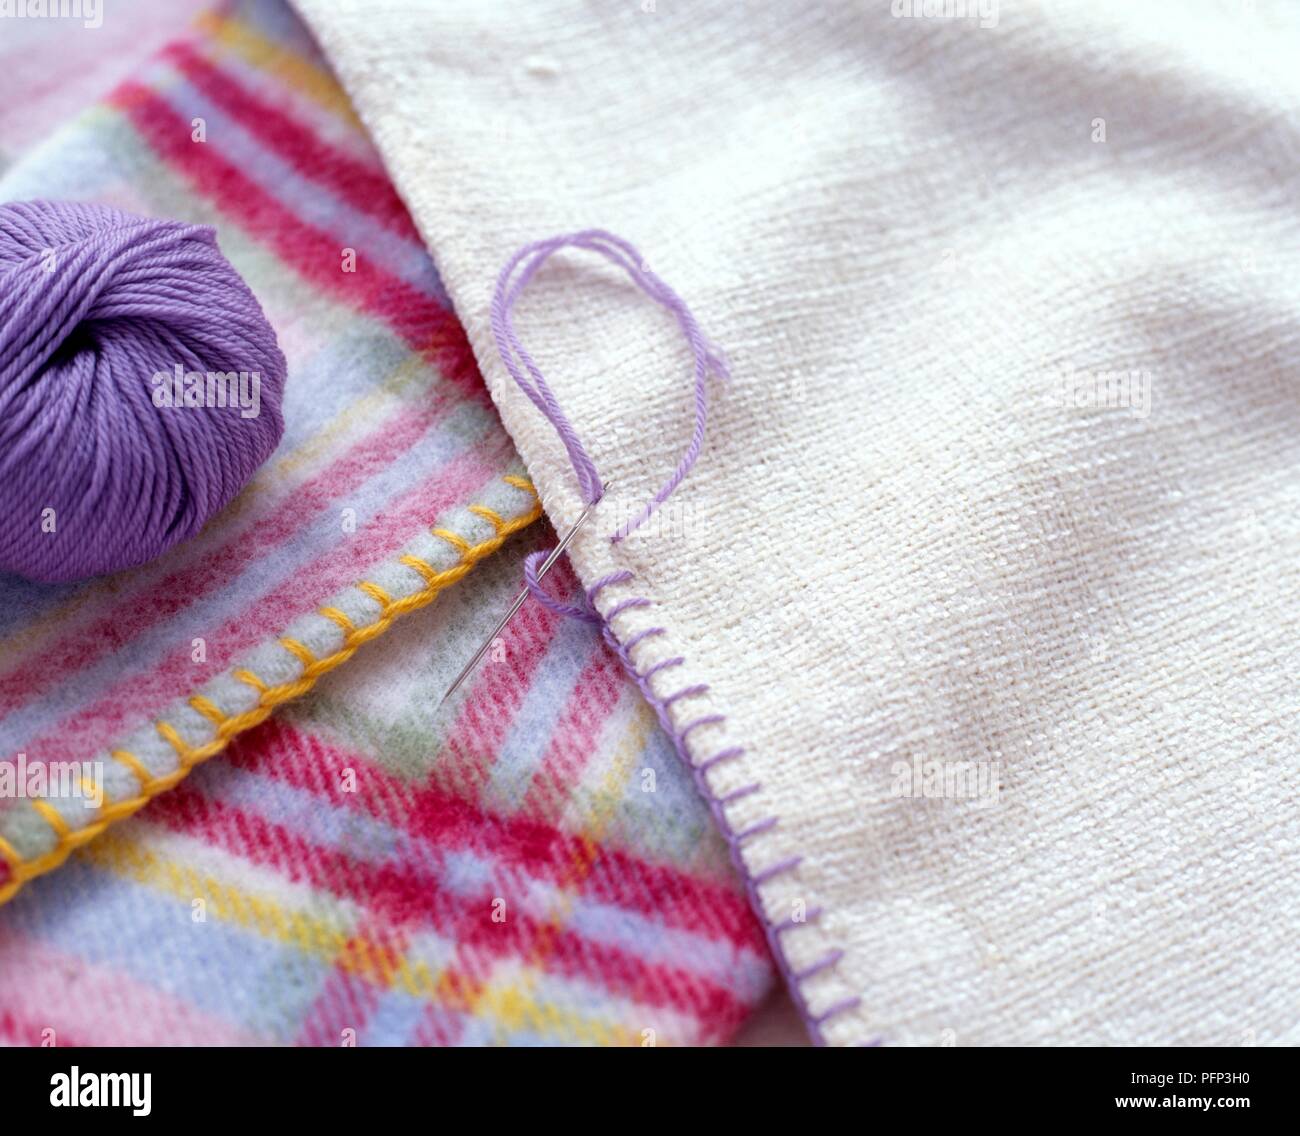 Blanket stitches decorating the edge of a fabric, ball of purple wool nearby Stock Photo